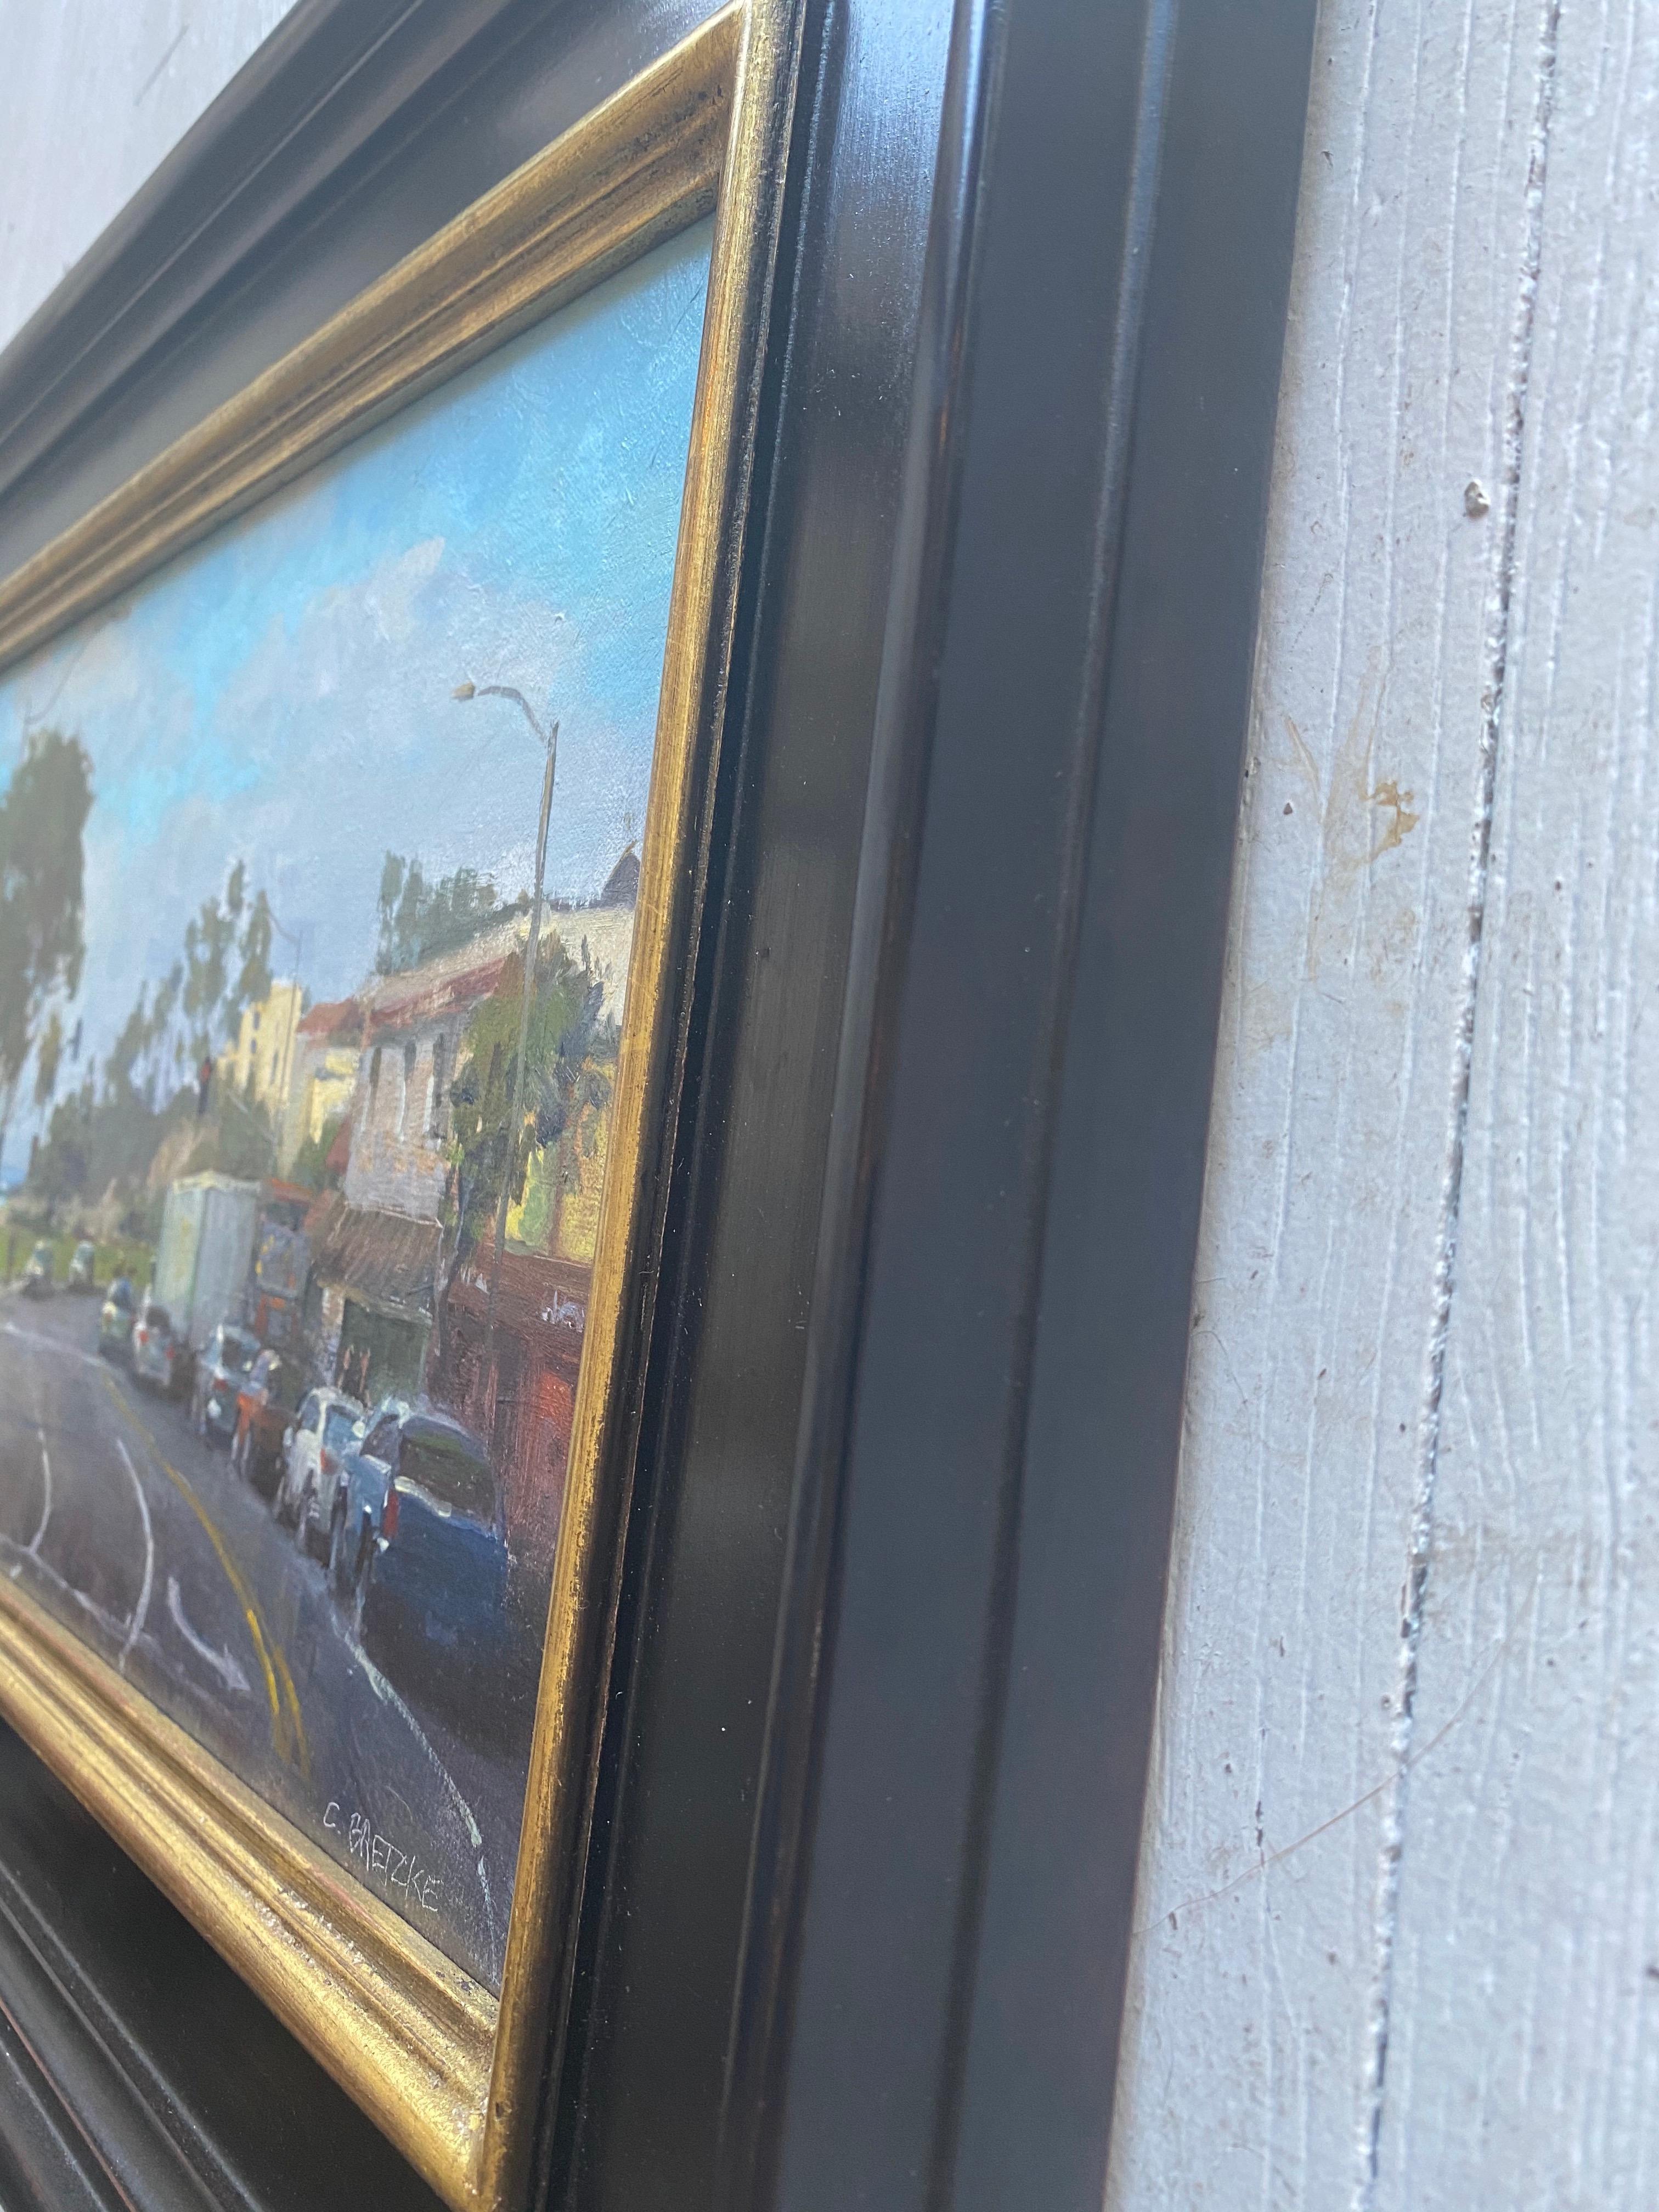 Painted from life, in Laguna Beach, California, Carl Bretzke captures the essence of this bustling 